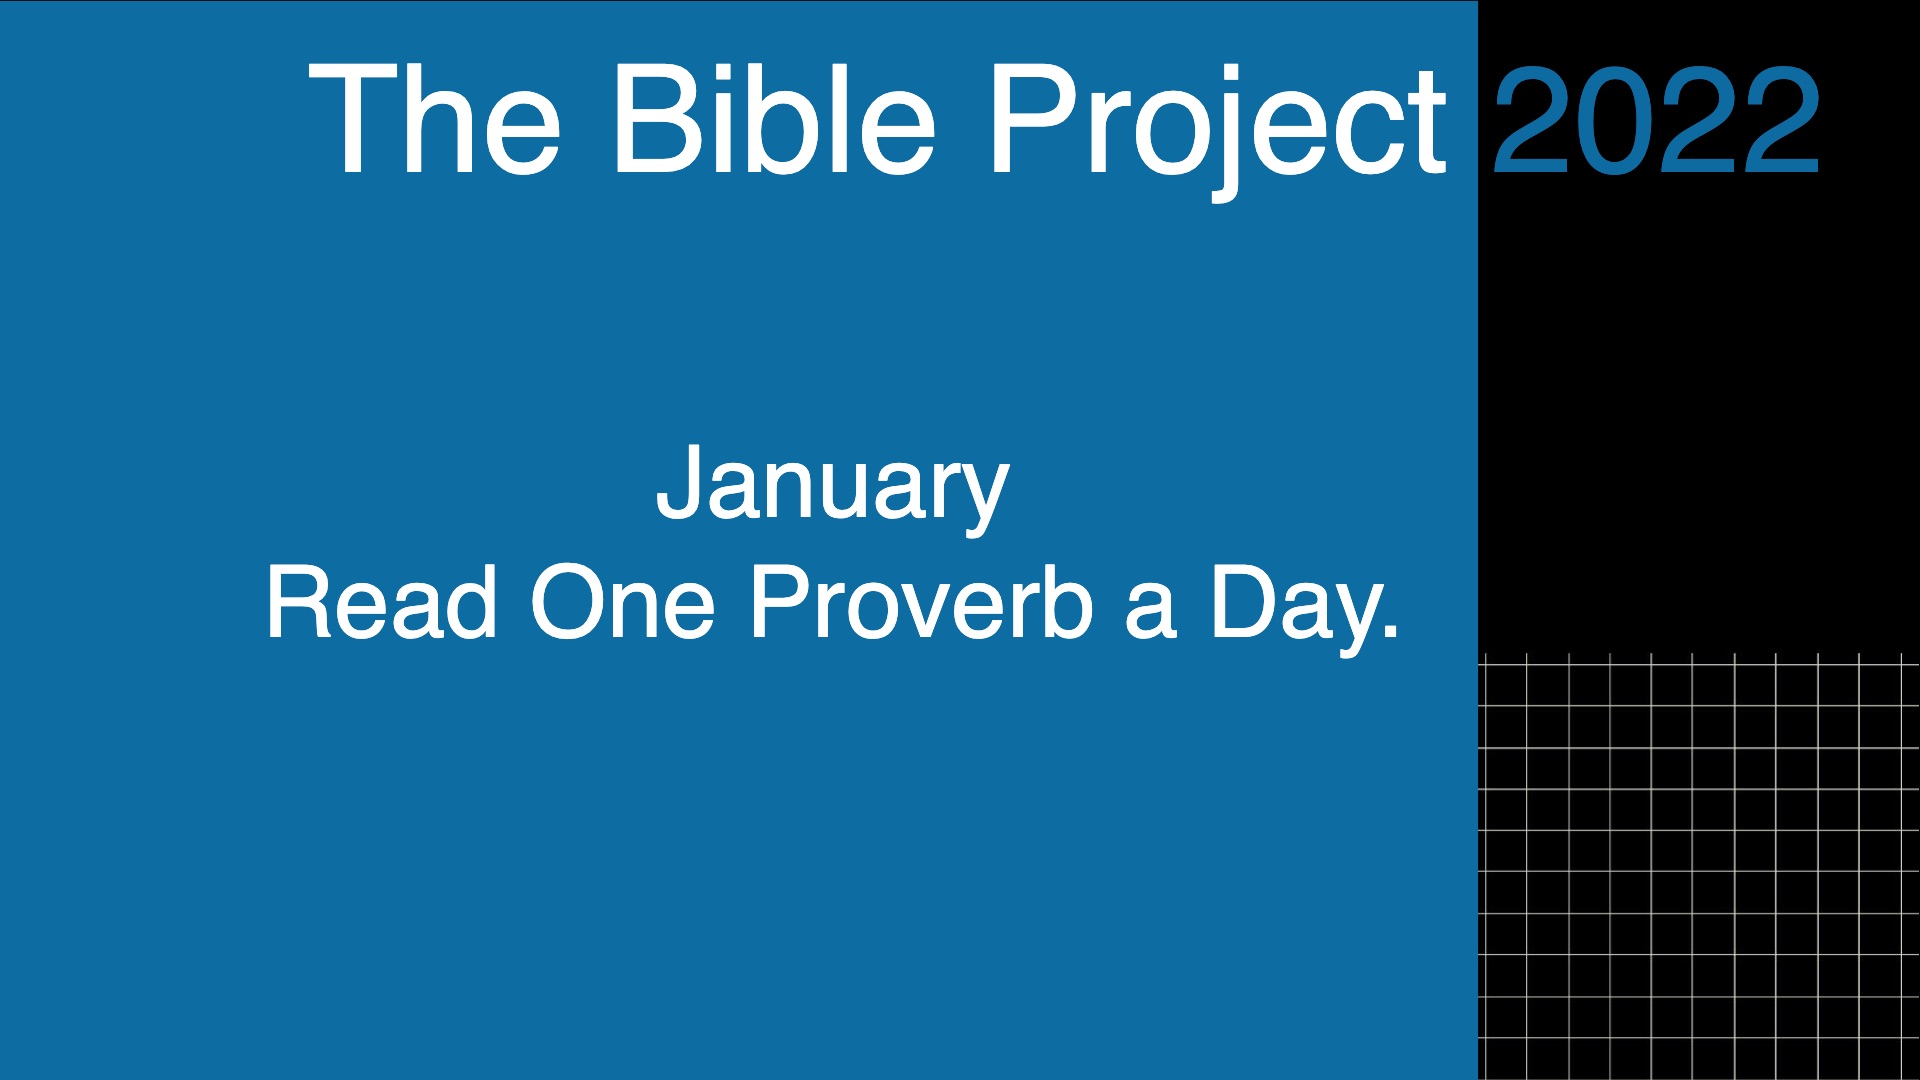 The Bible Project 2022